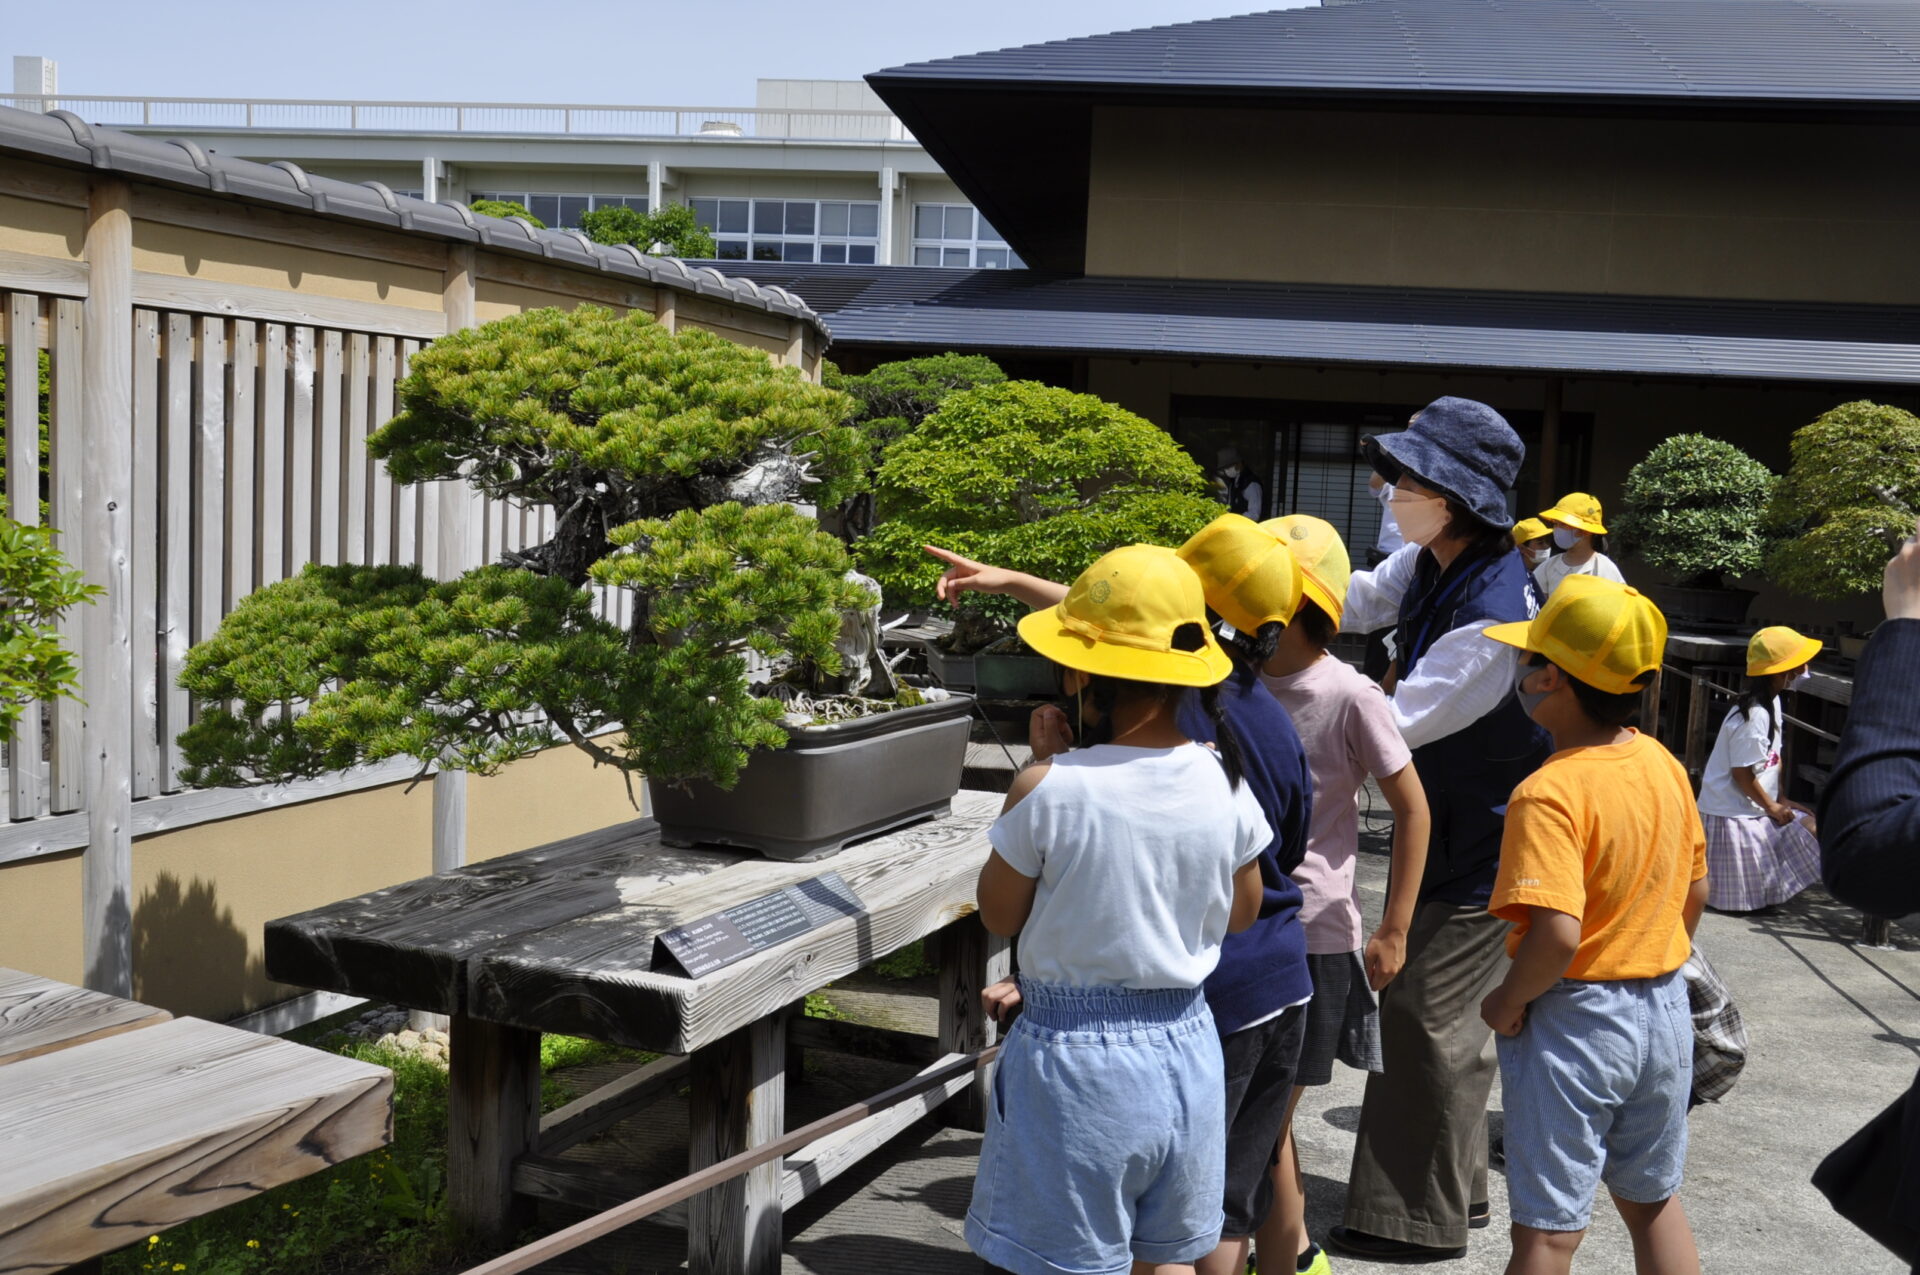 Introducing the exhibits to elementary school students (bonsai garden)